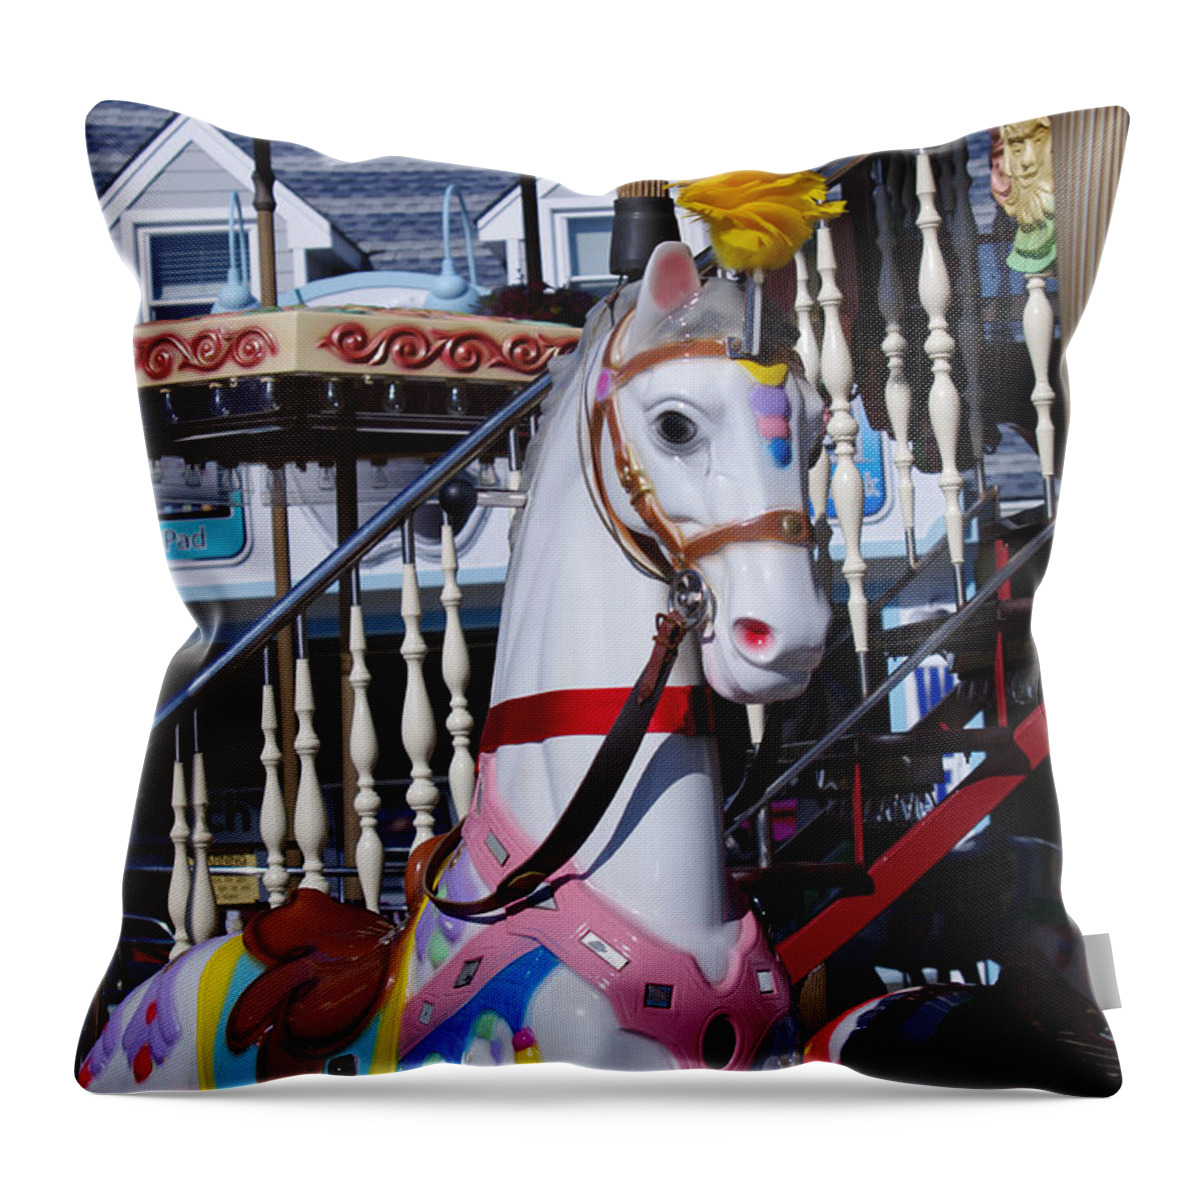 Horse Throw Pillow featuring the photograph Carousel Steed by Greg Graham